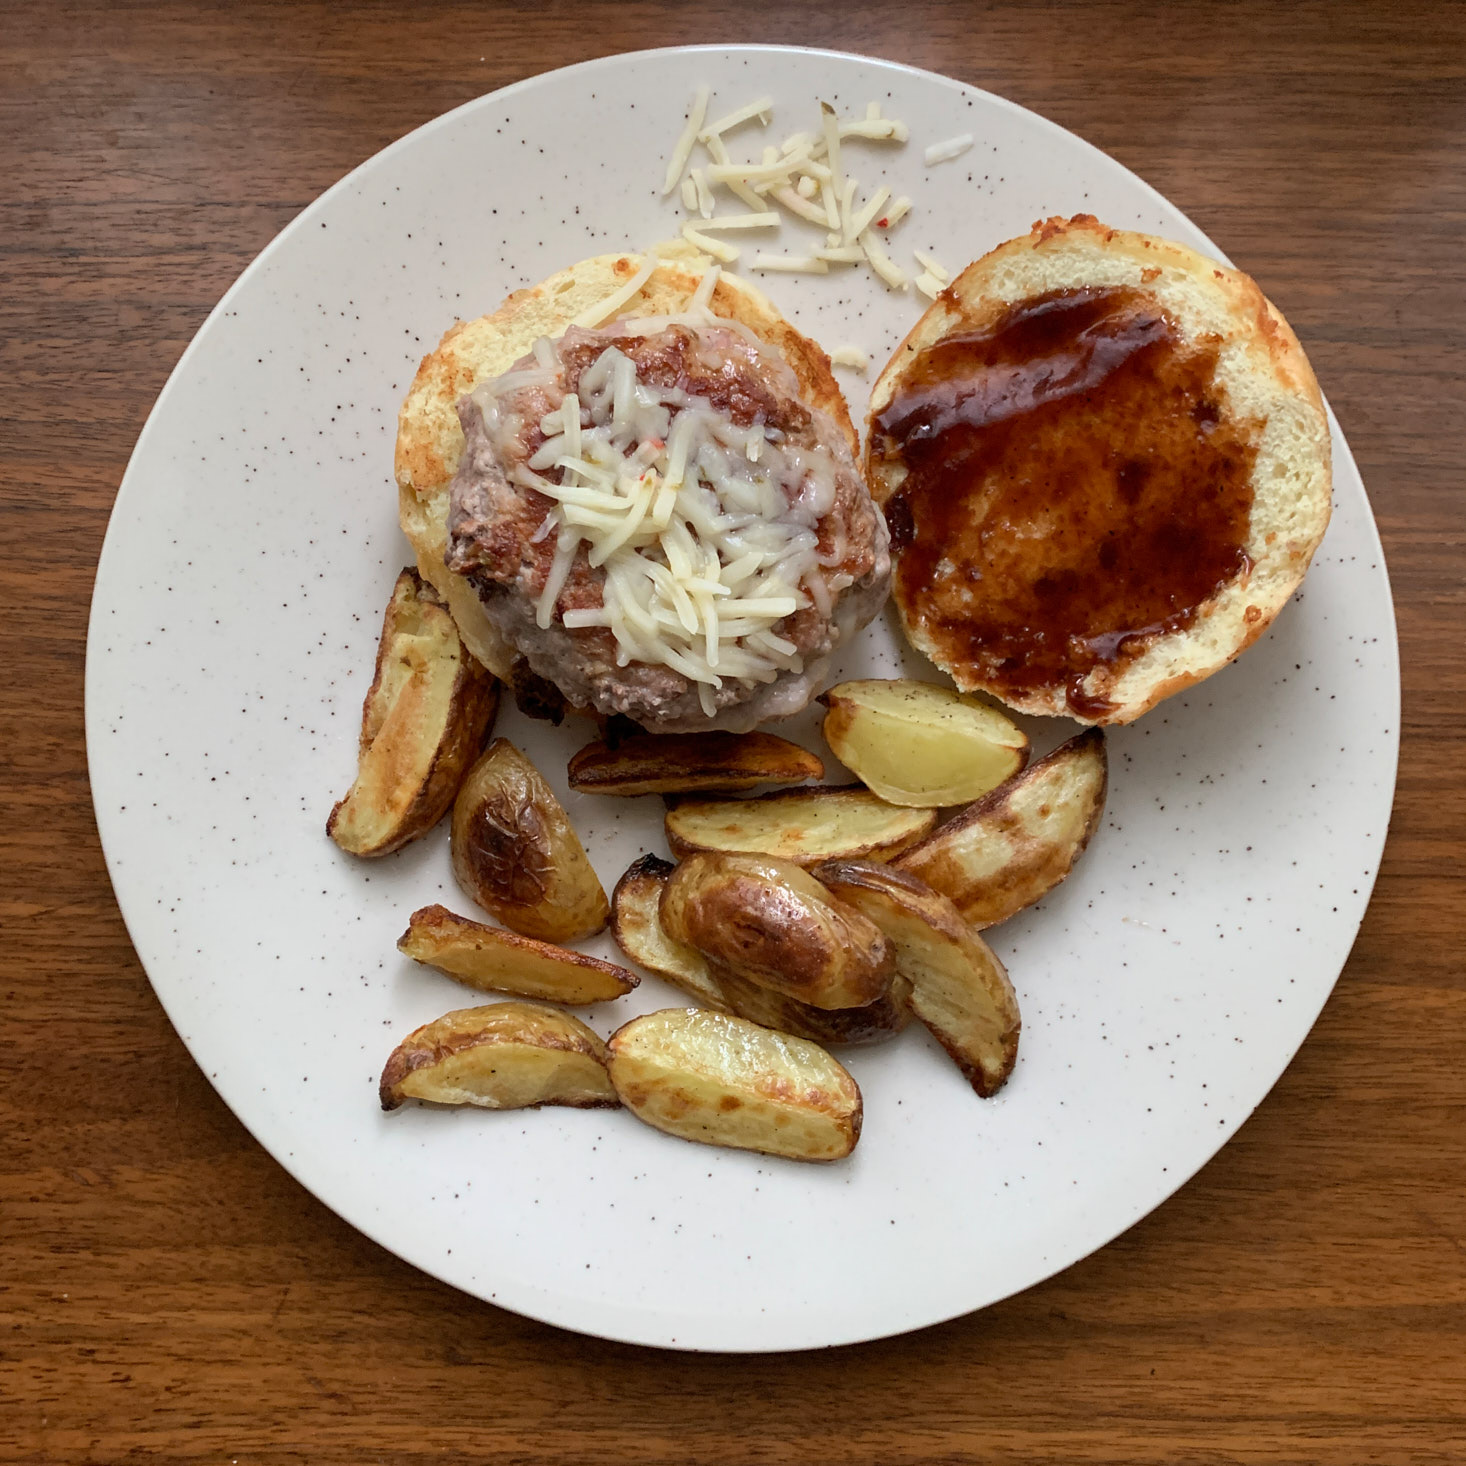 finished Gooey Stuffed Pork Burgers meal on plate